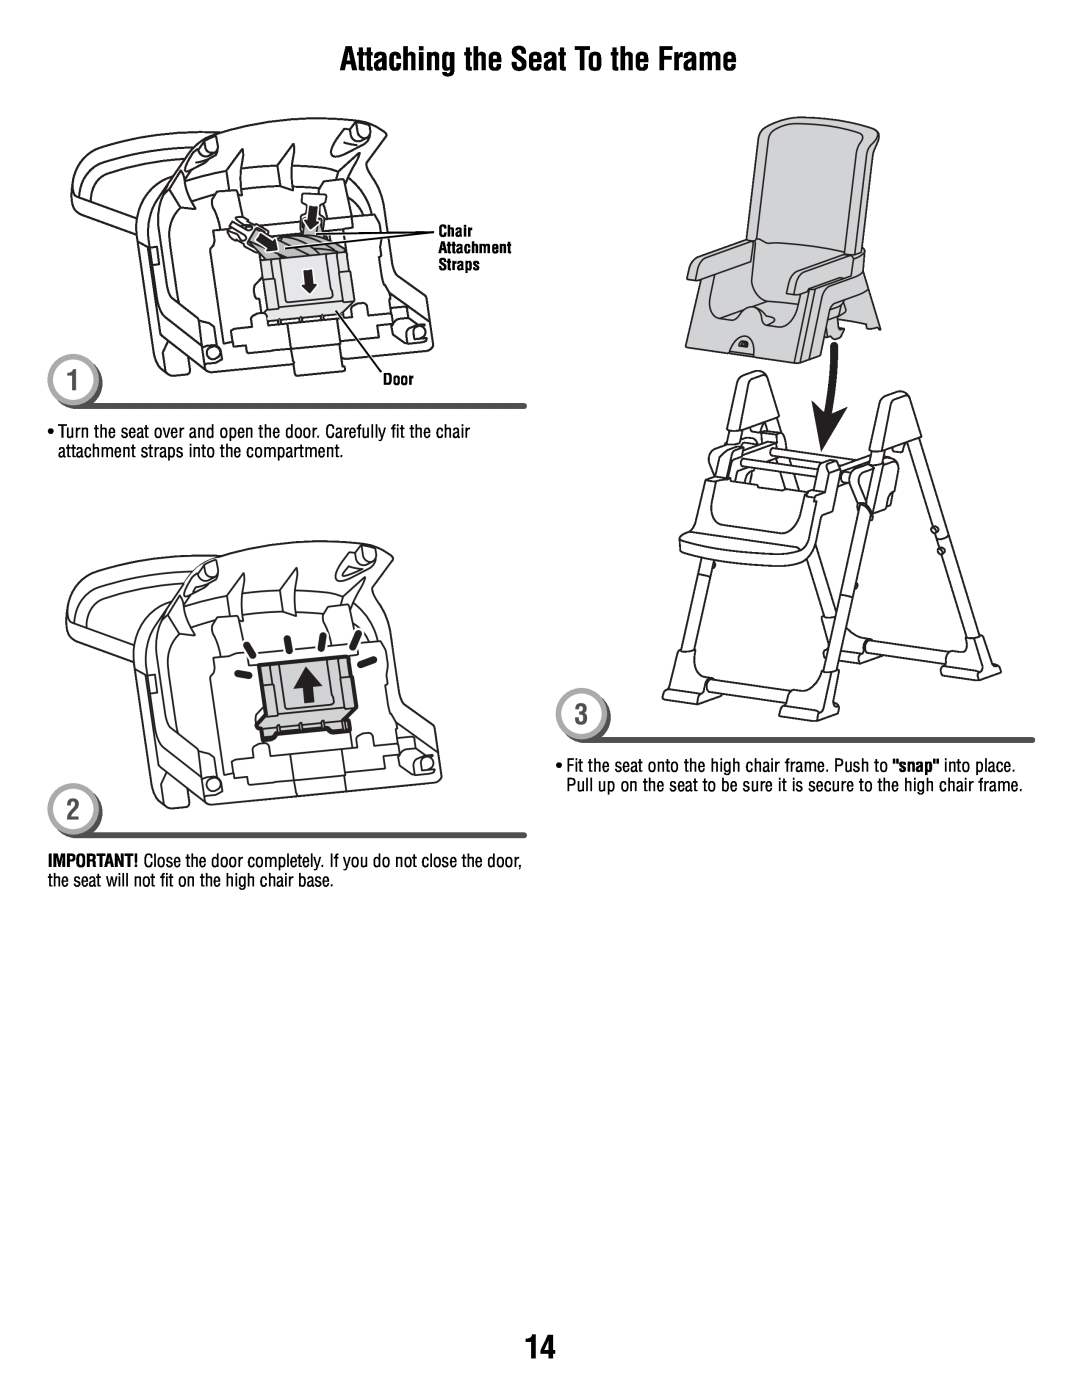 Fisher-Price P9043 manual Attaching the Seat To the Frame, Chair Attachment Straps 